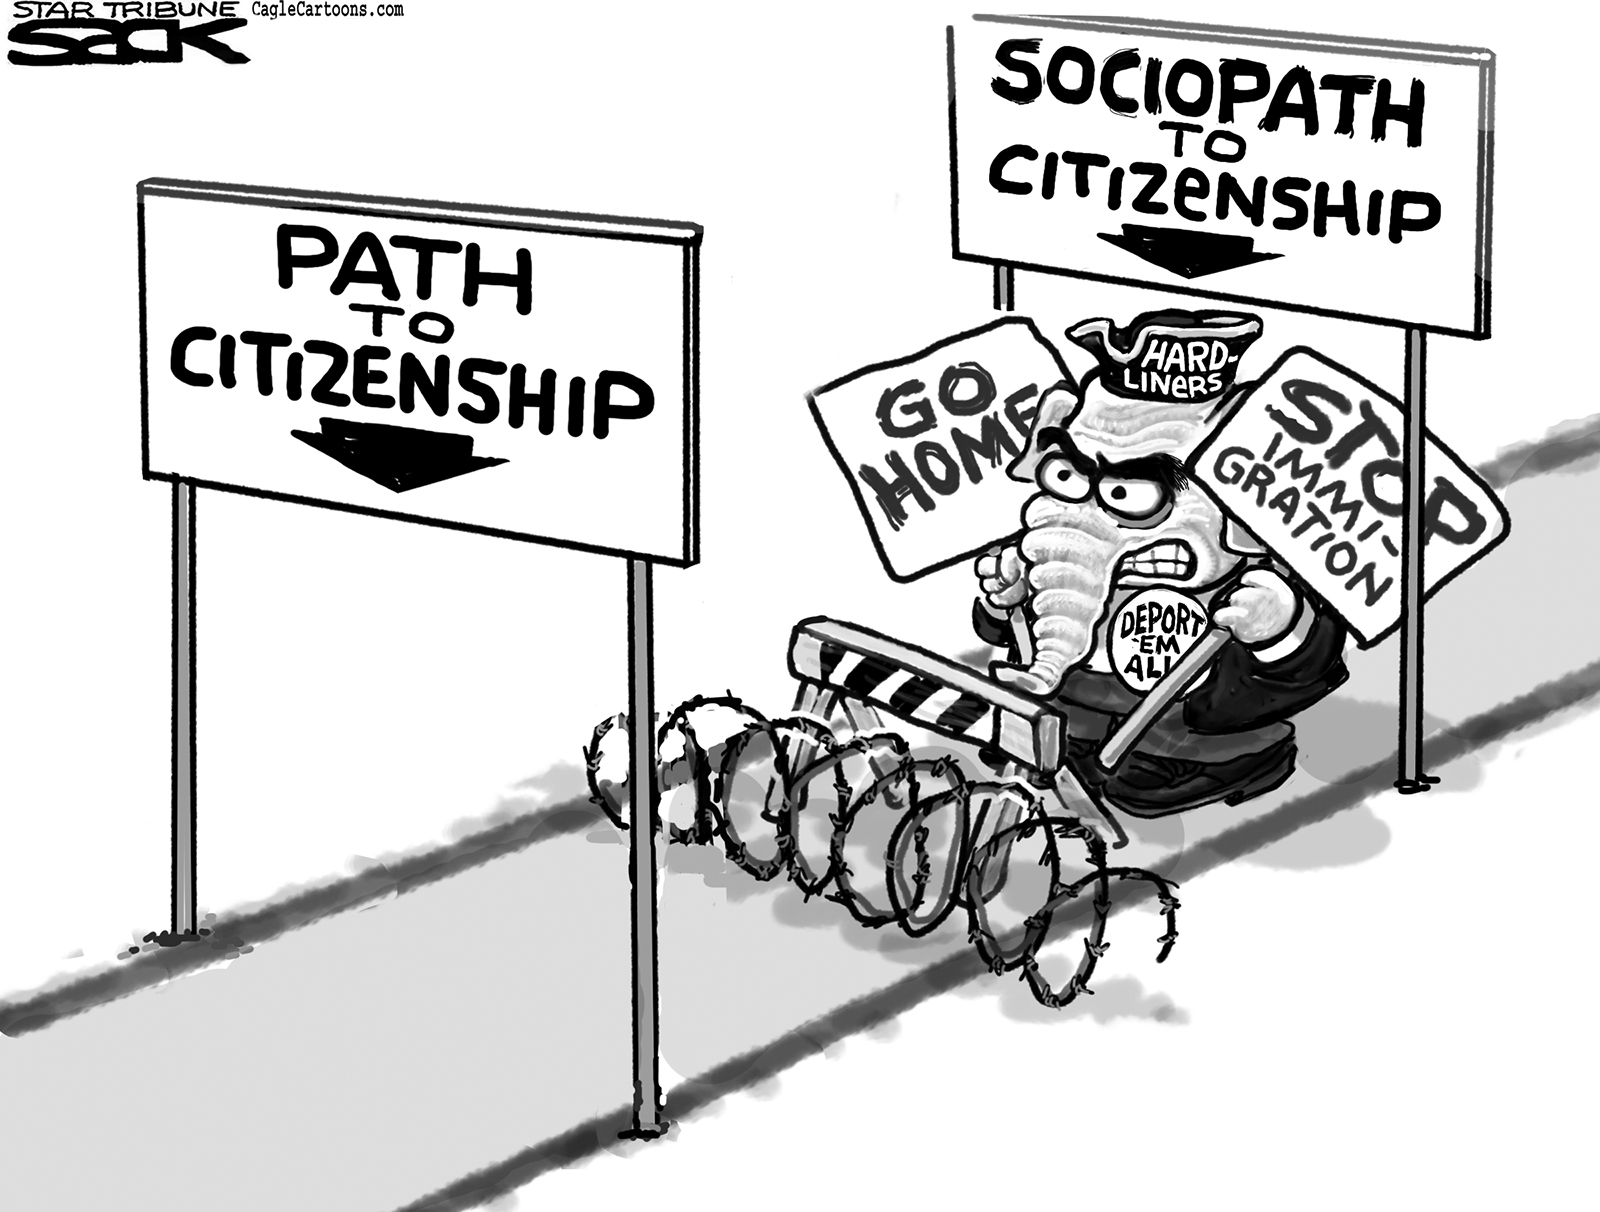 Path to Citizenship